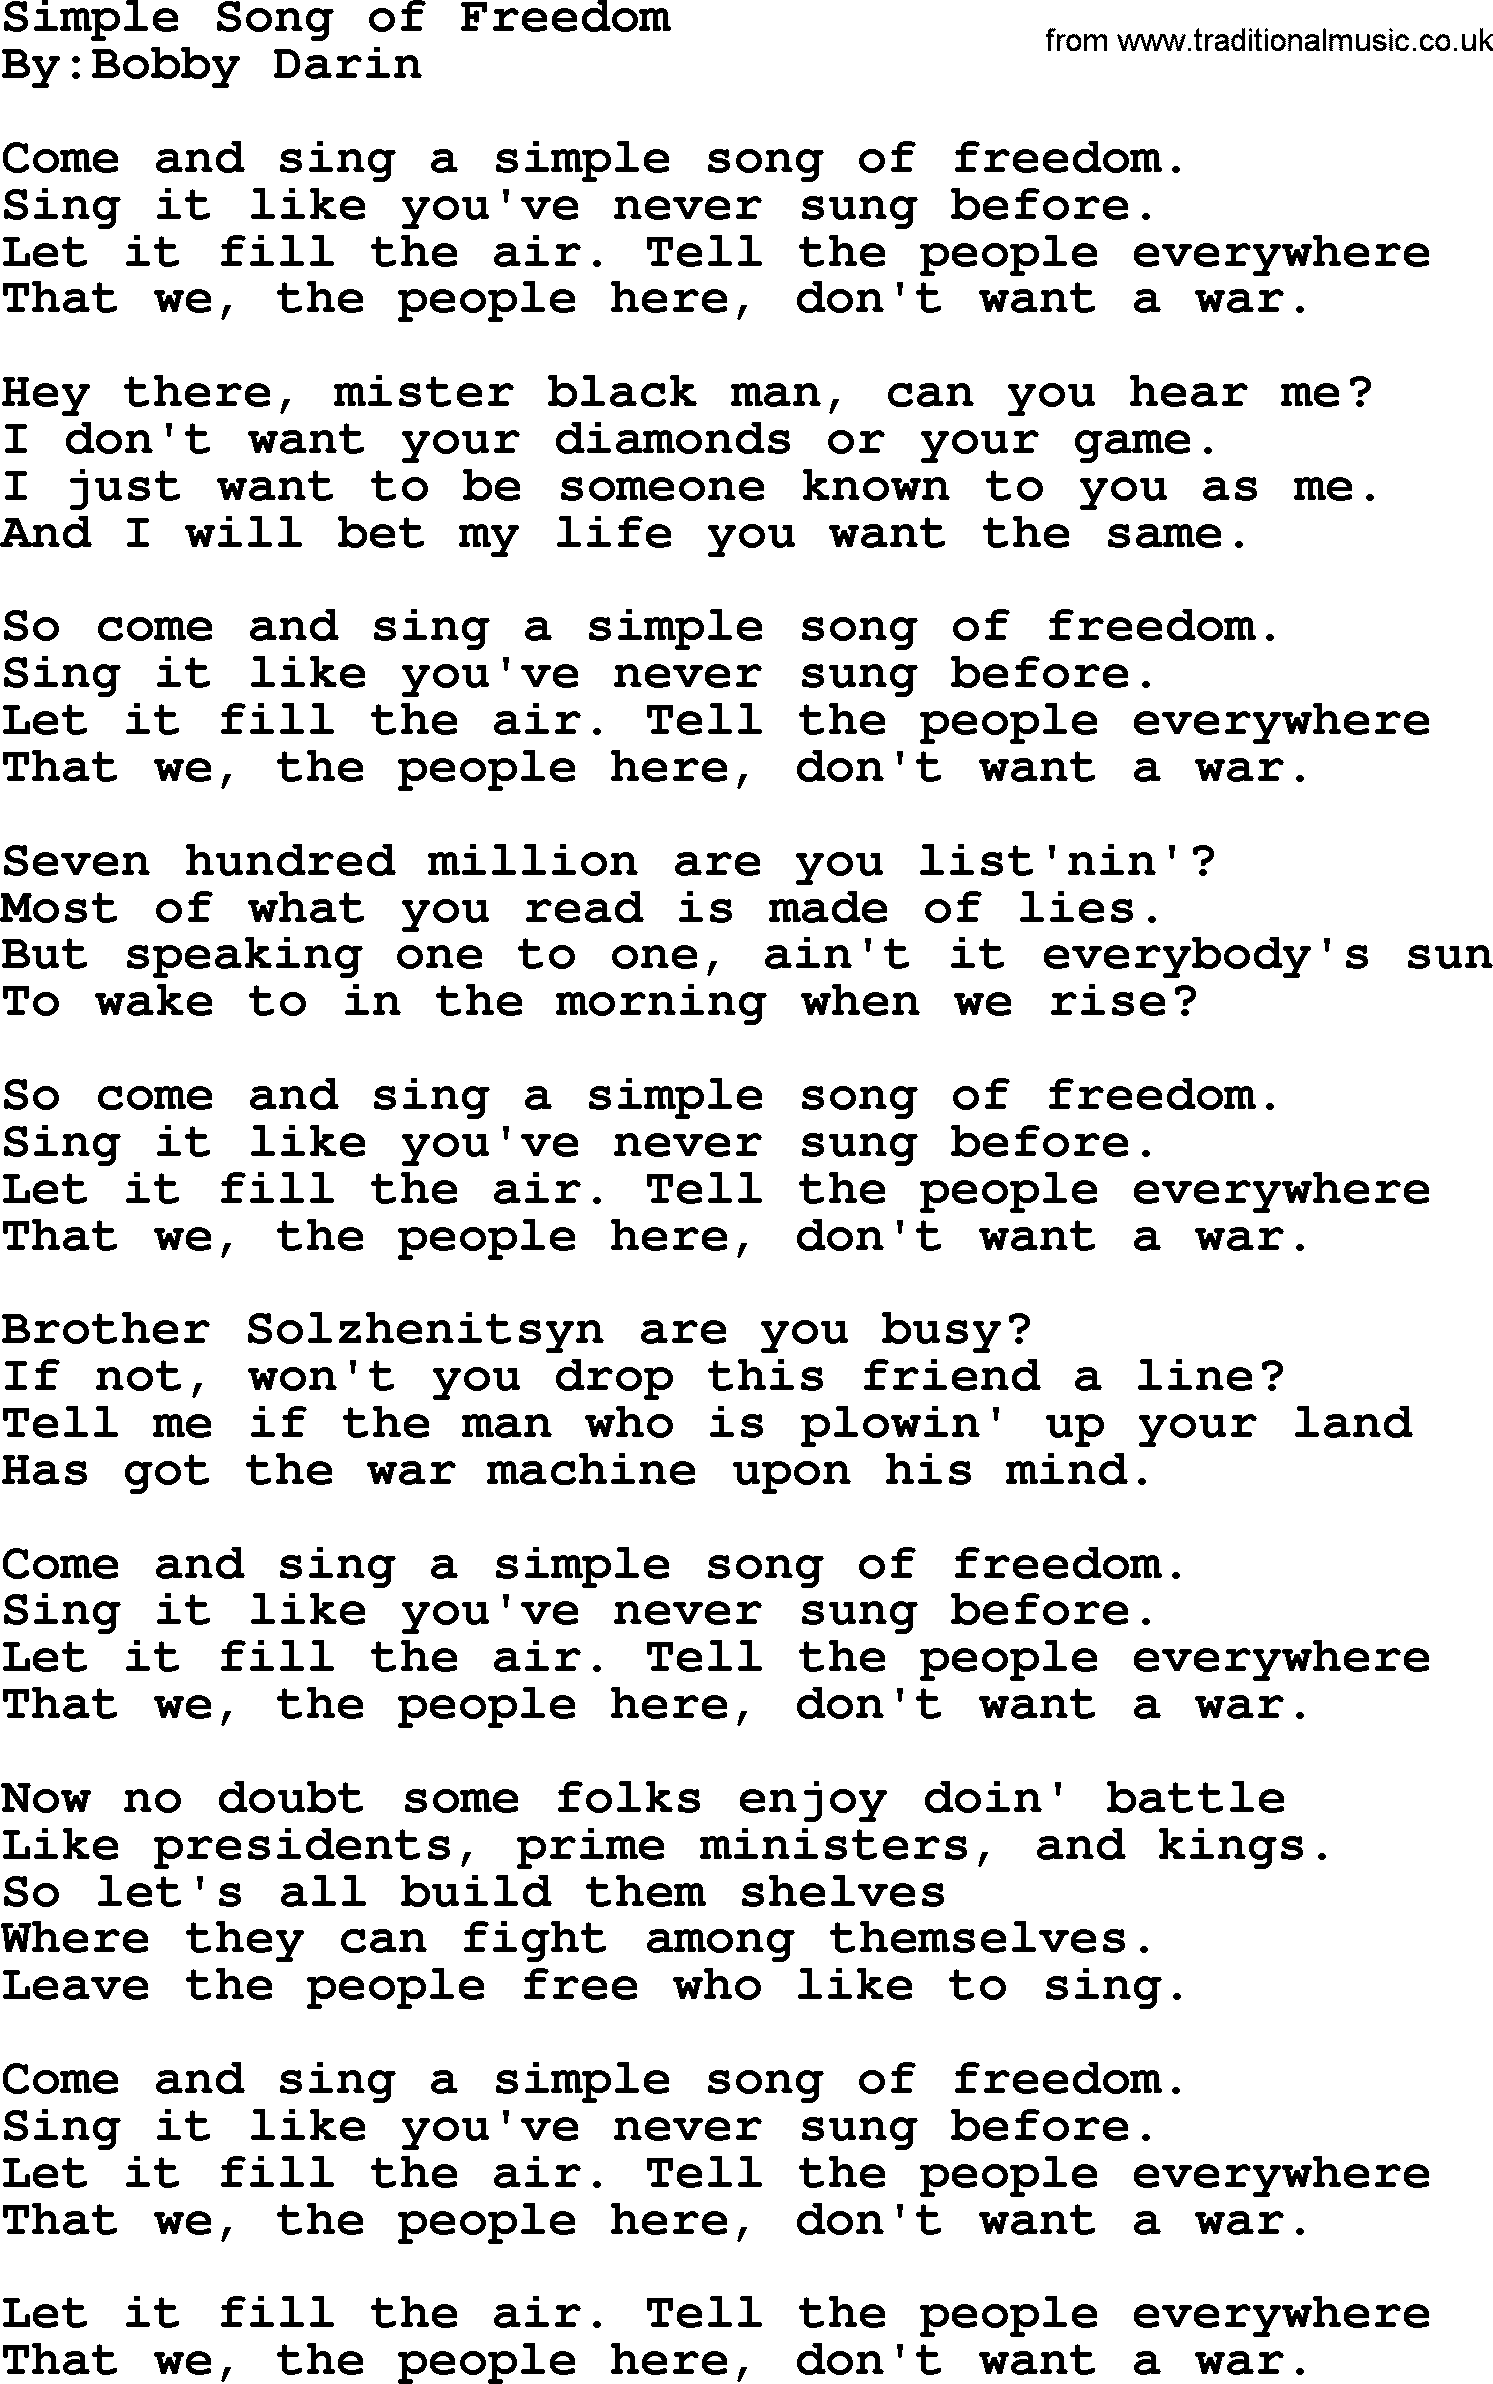 Political, Solidarity, Workers or Union song: Simple Song Of Freedom, lyrics